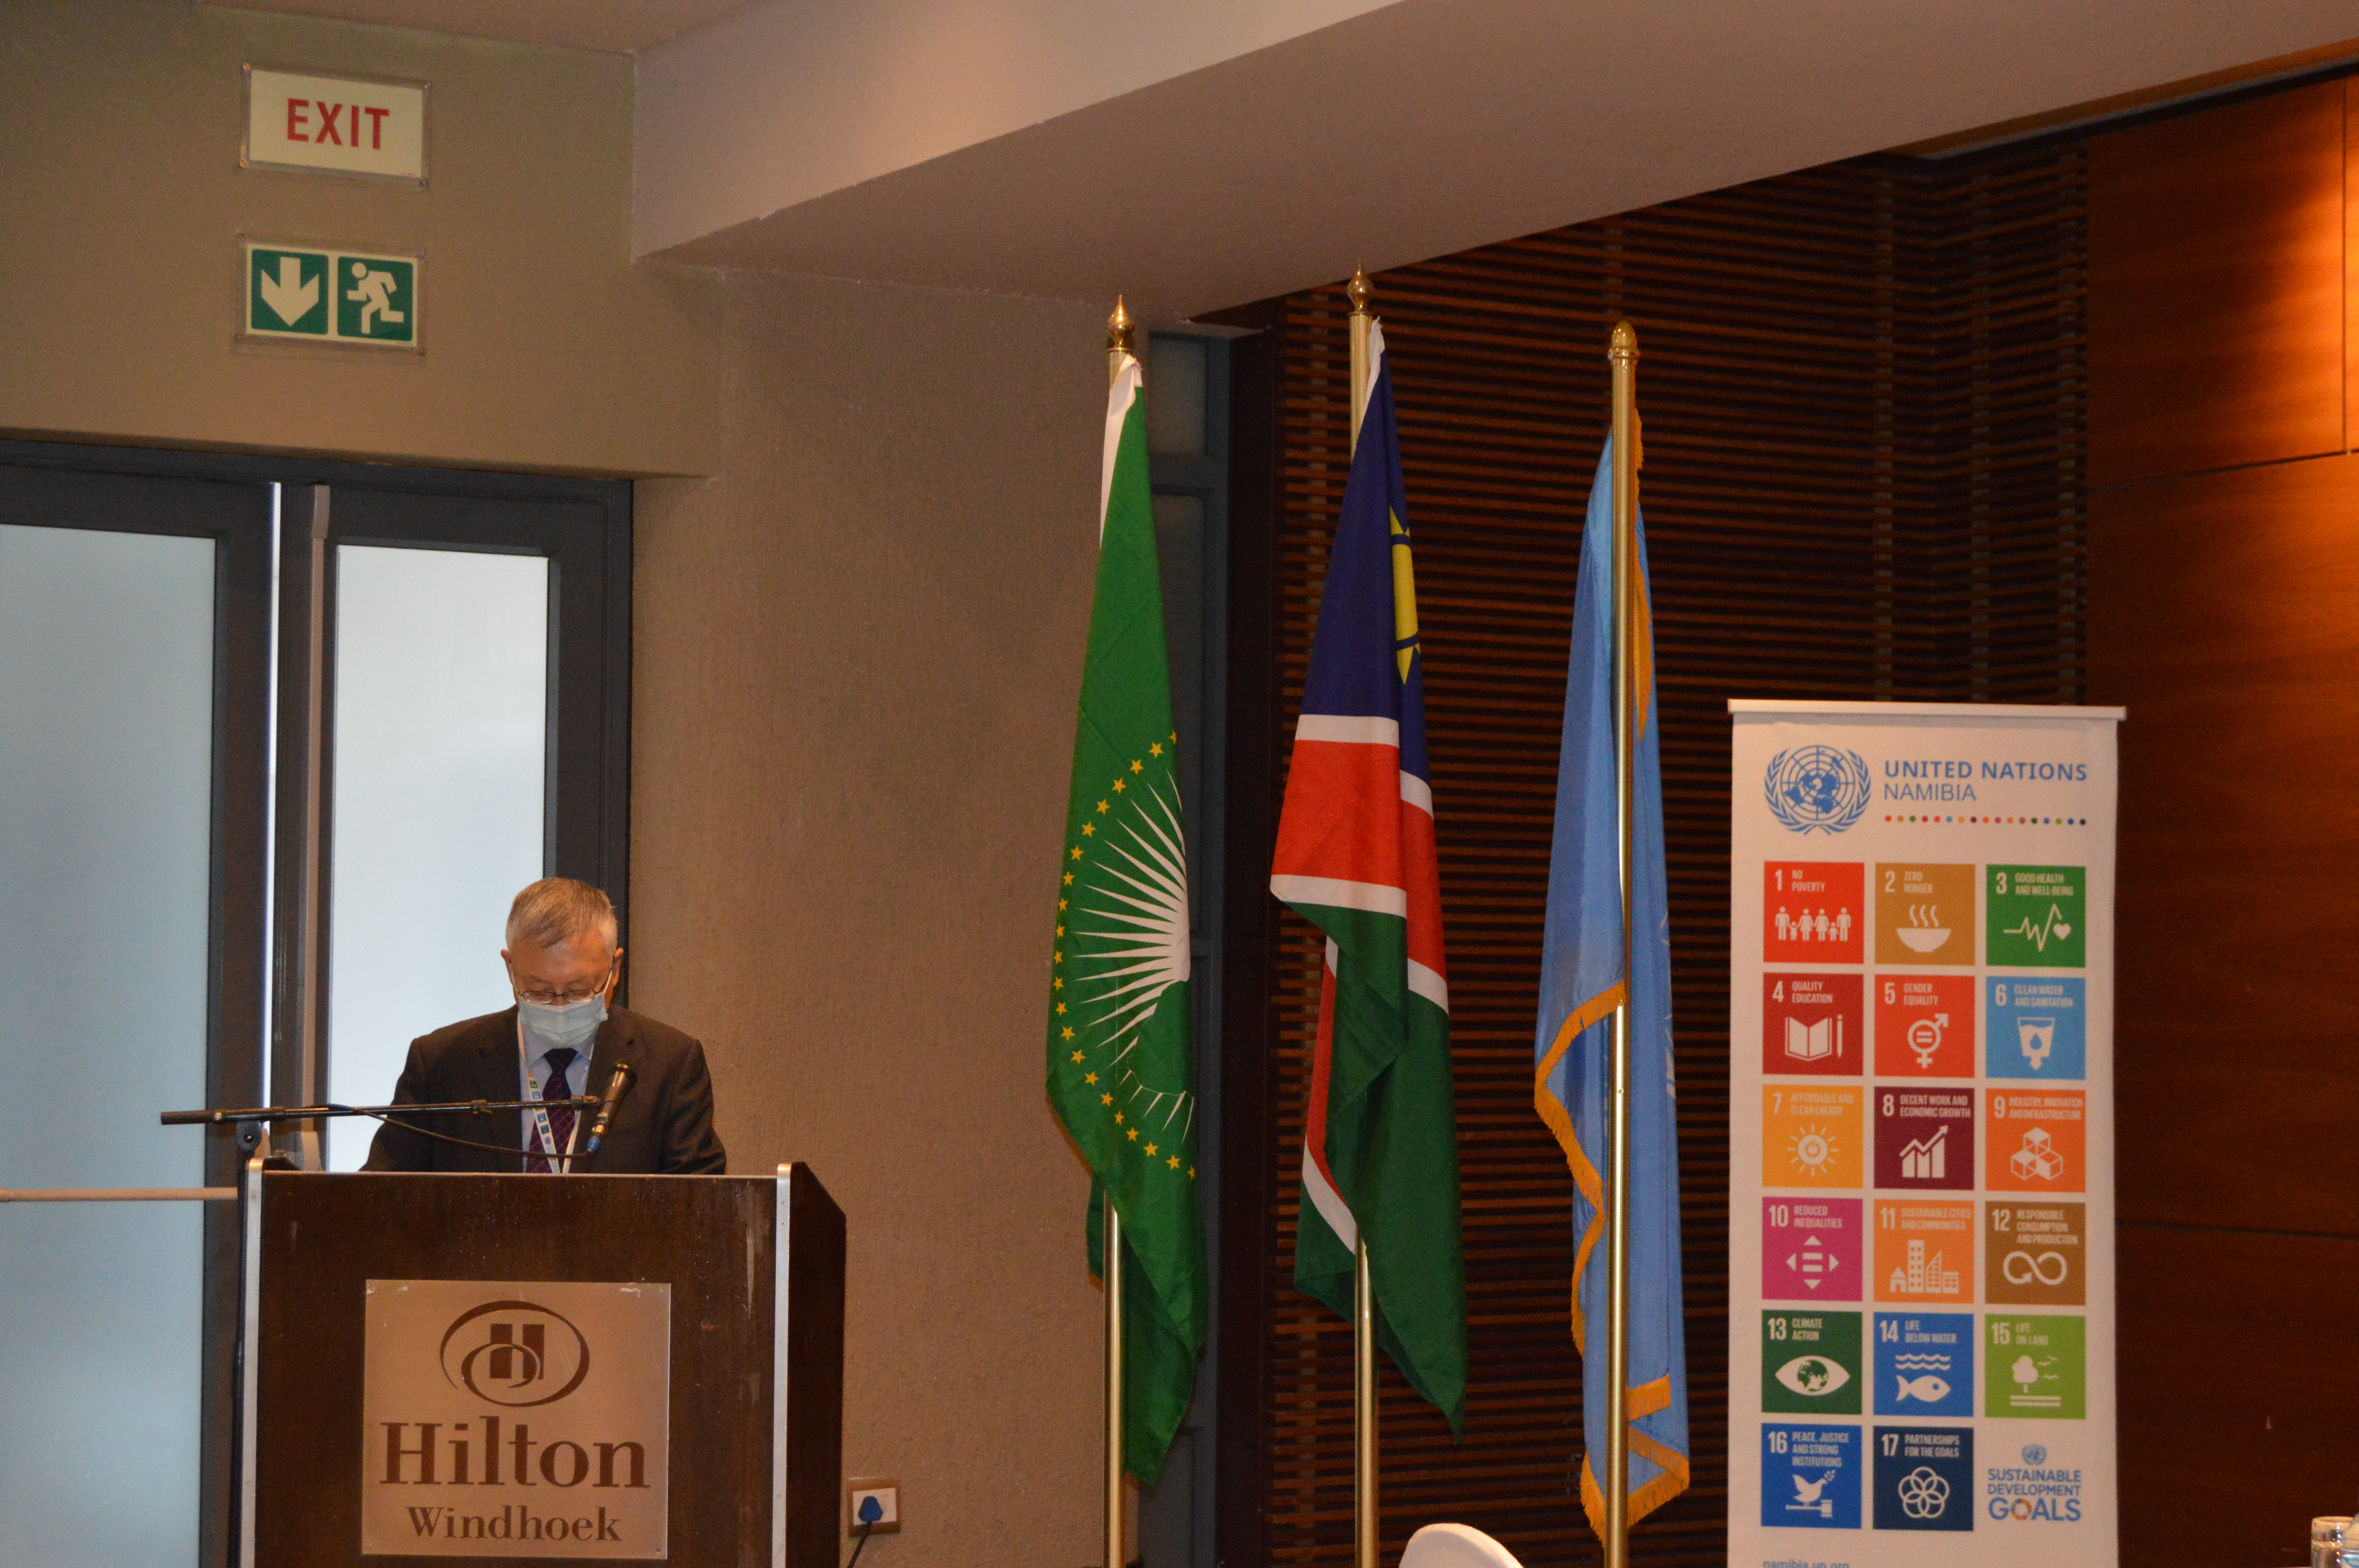 UN Namibia Convenes 3rd Sustainable Development Dialogue Series (SDDS) on Financing Food Security with International Financial Institutions (IFIs)